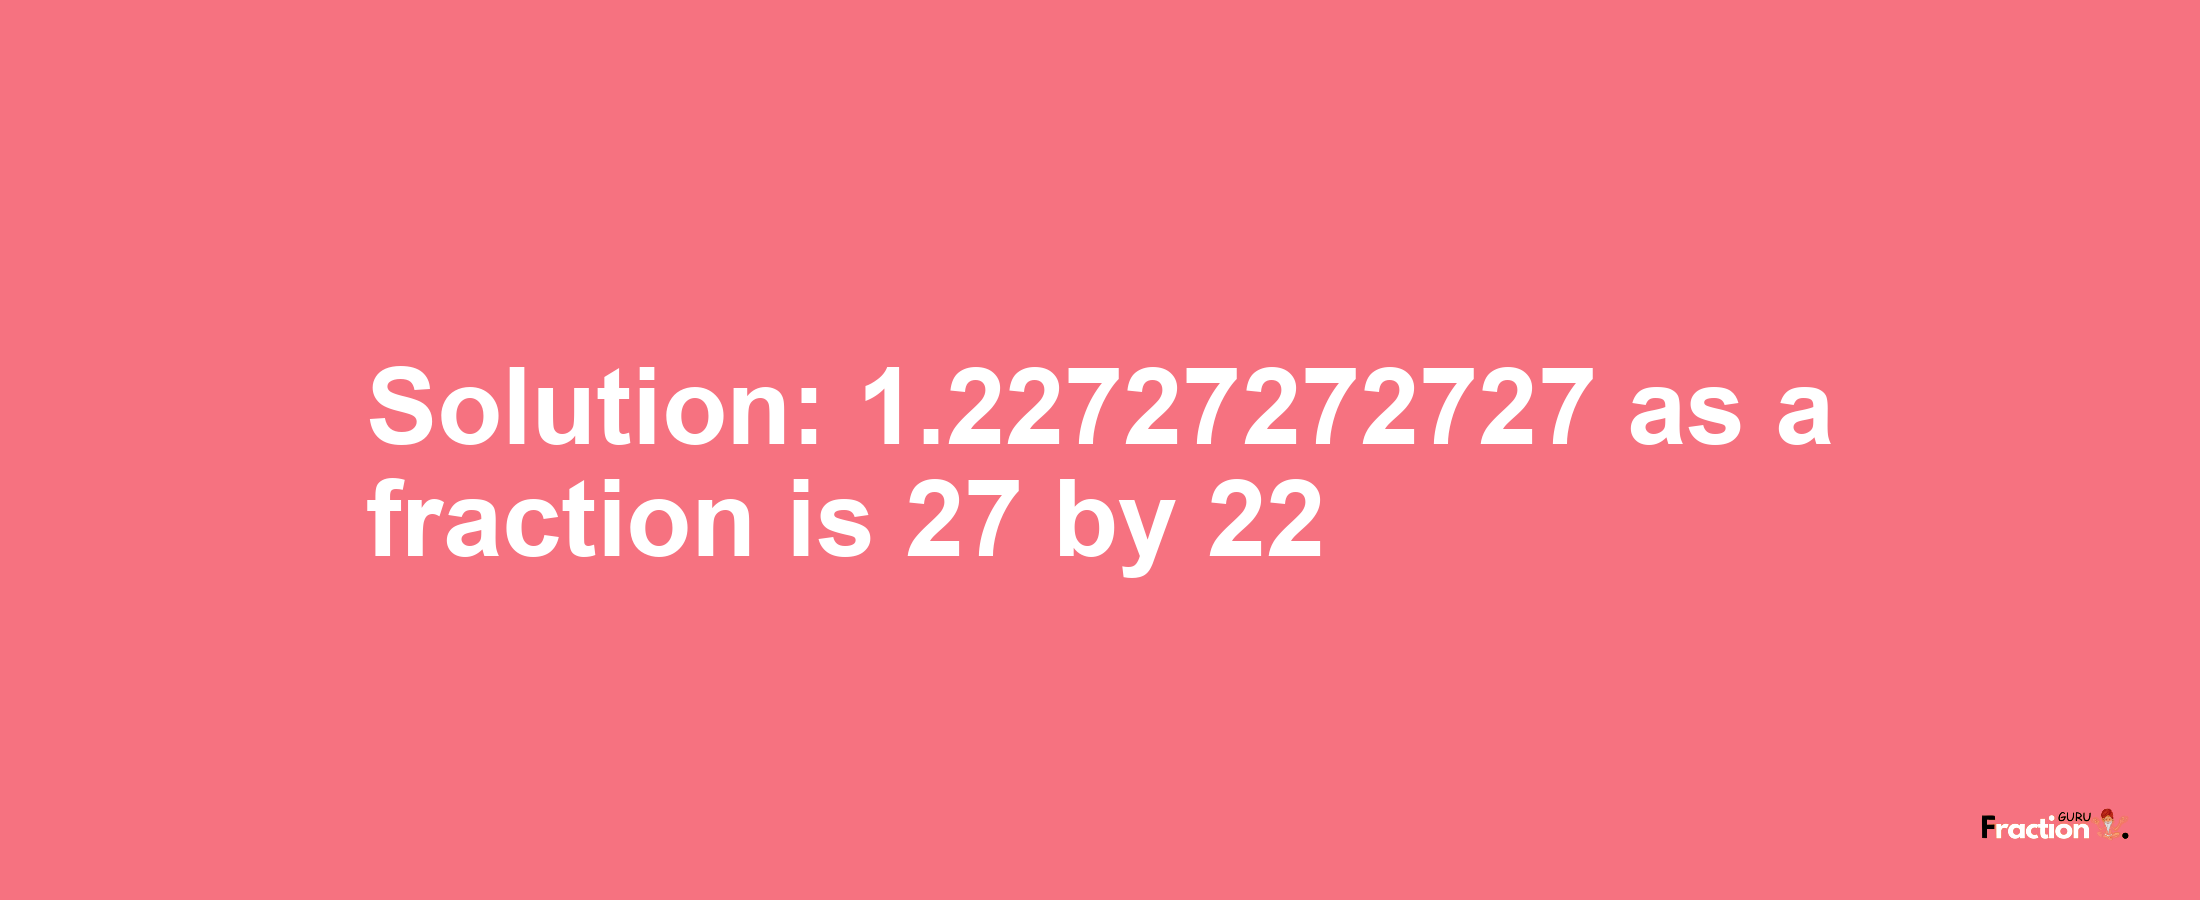 Solution:1.22727272727 as a fraction is 27/22